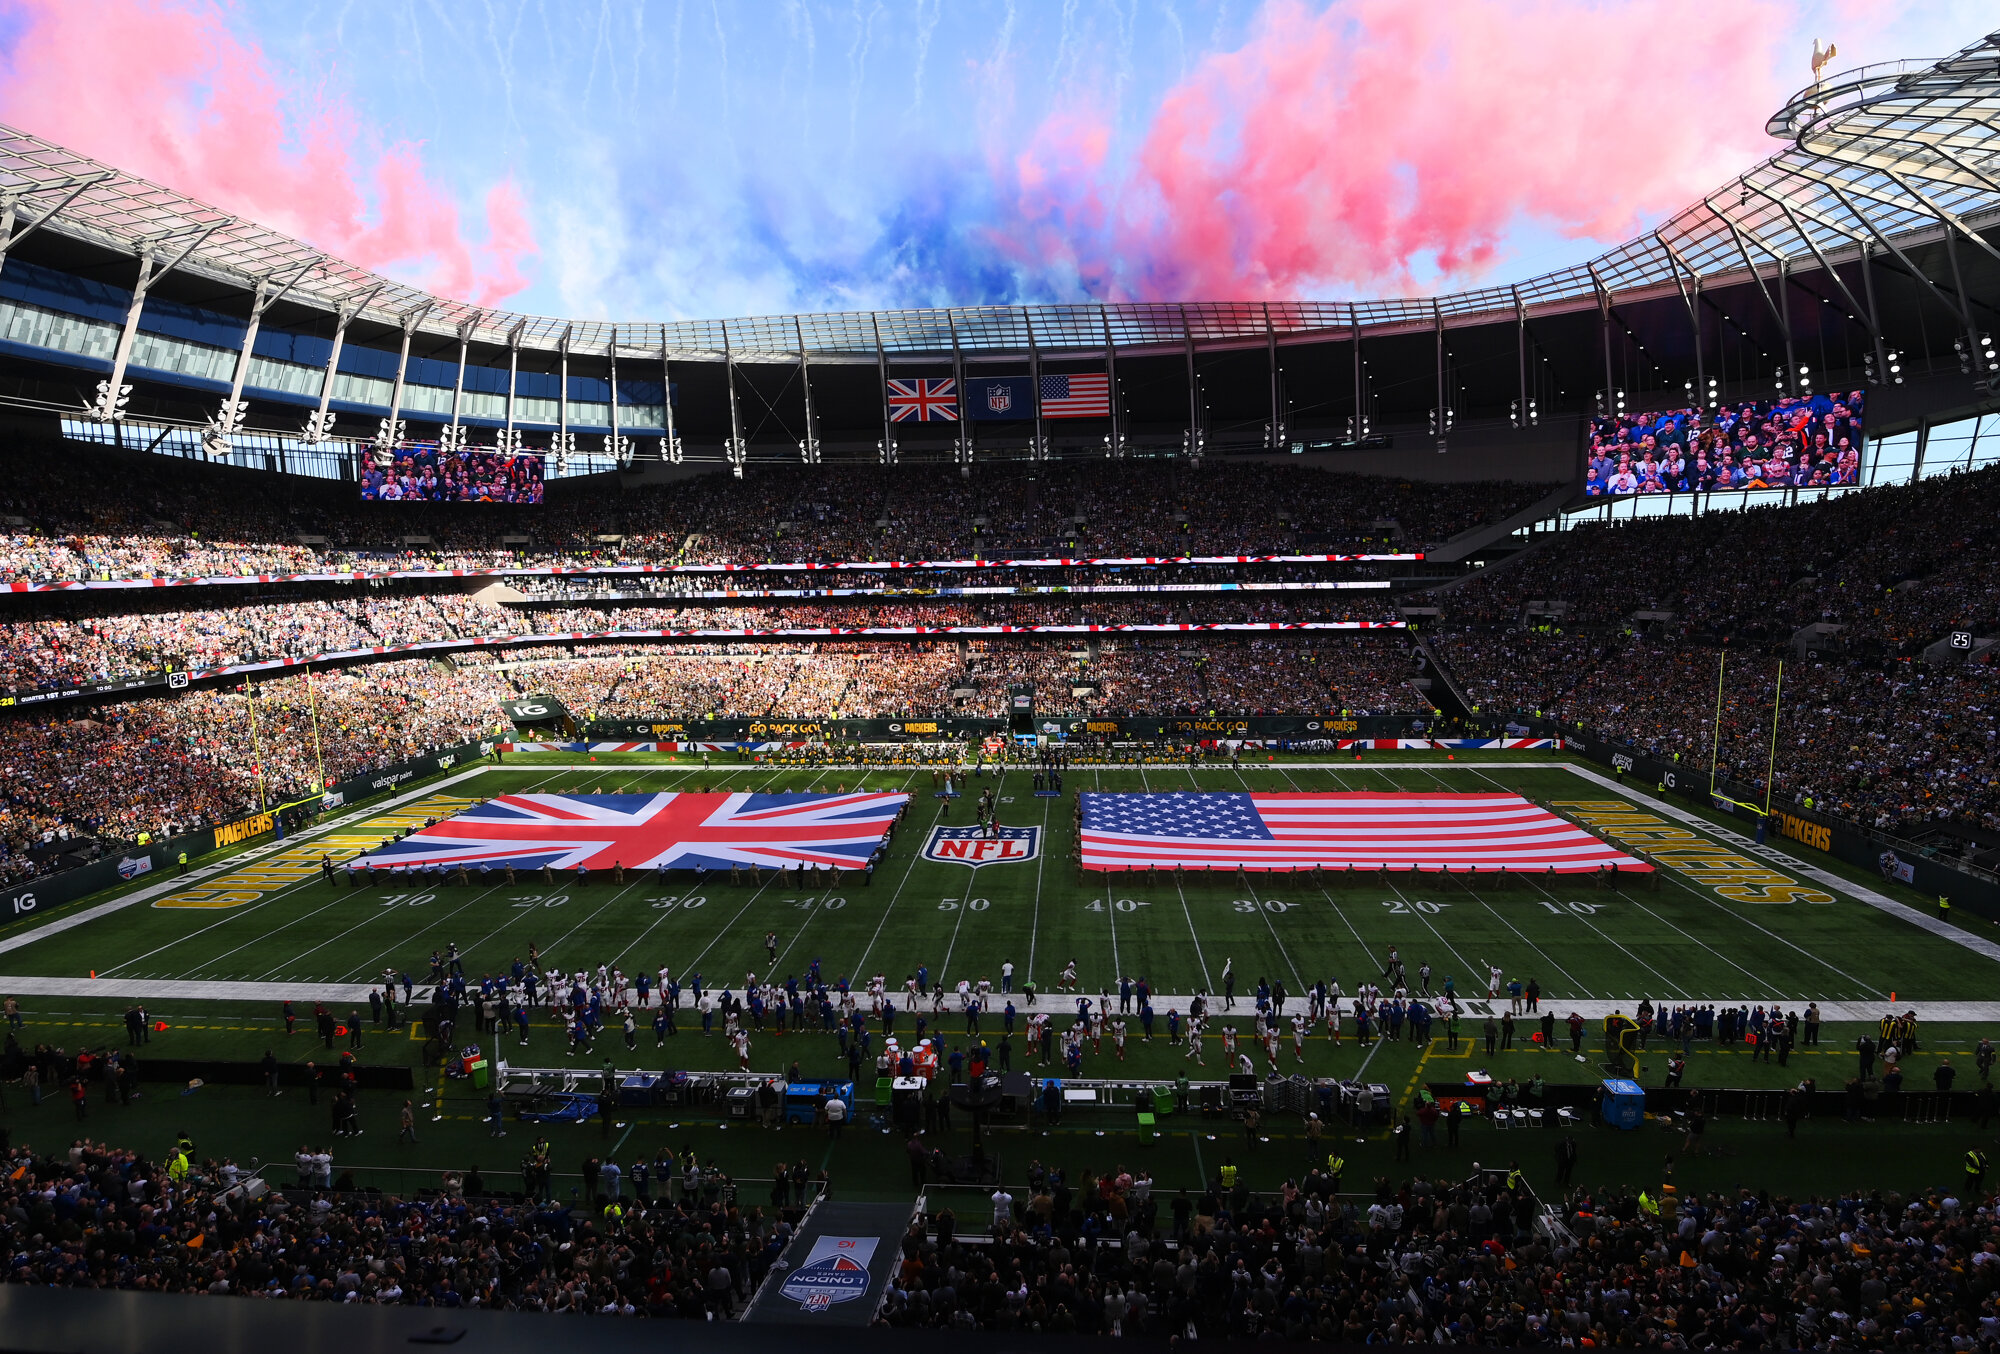 The NFL London Games New York Giants vs Green Bay Packers Rocked My